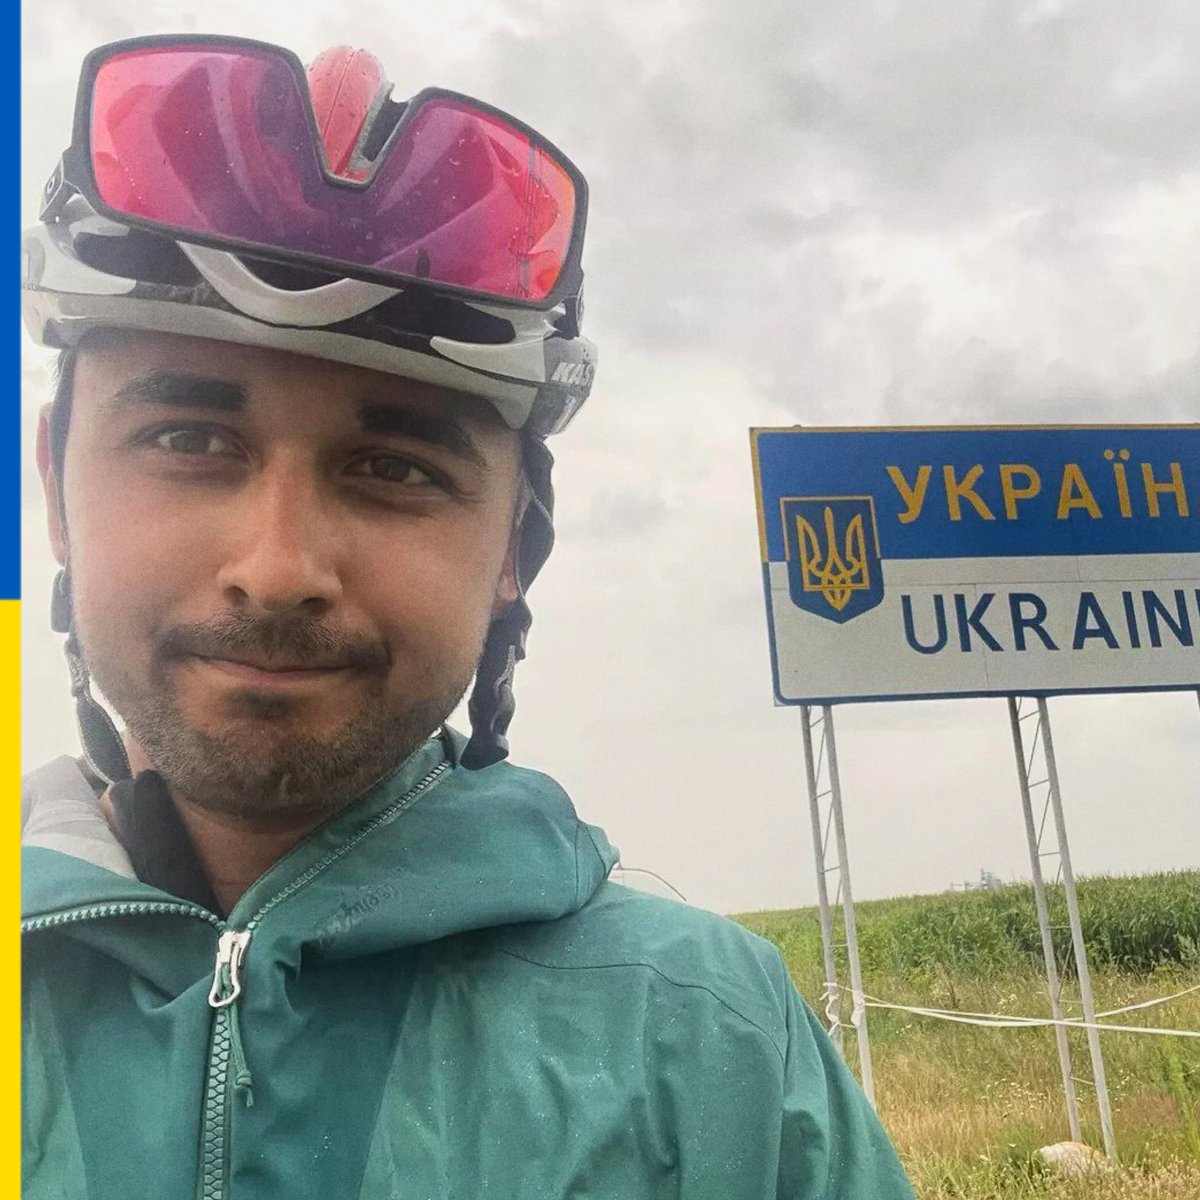 Route 'Bravery - Ukraine' — built. More than UAH 540,000 for the Armed Forces was collected🚴🏻 The youngest mayor of Norway, Jonas Andersen Syed, rode a bicycle from Sokndal to the village of Zaliznytsia in 11 days and collected funds to help the fighters from this village